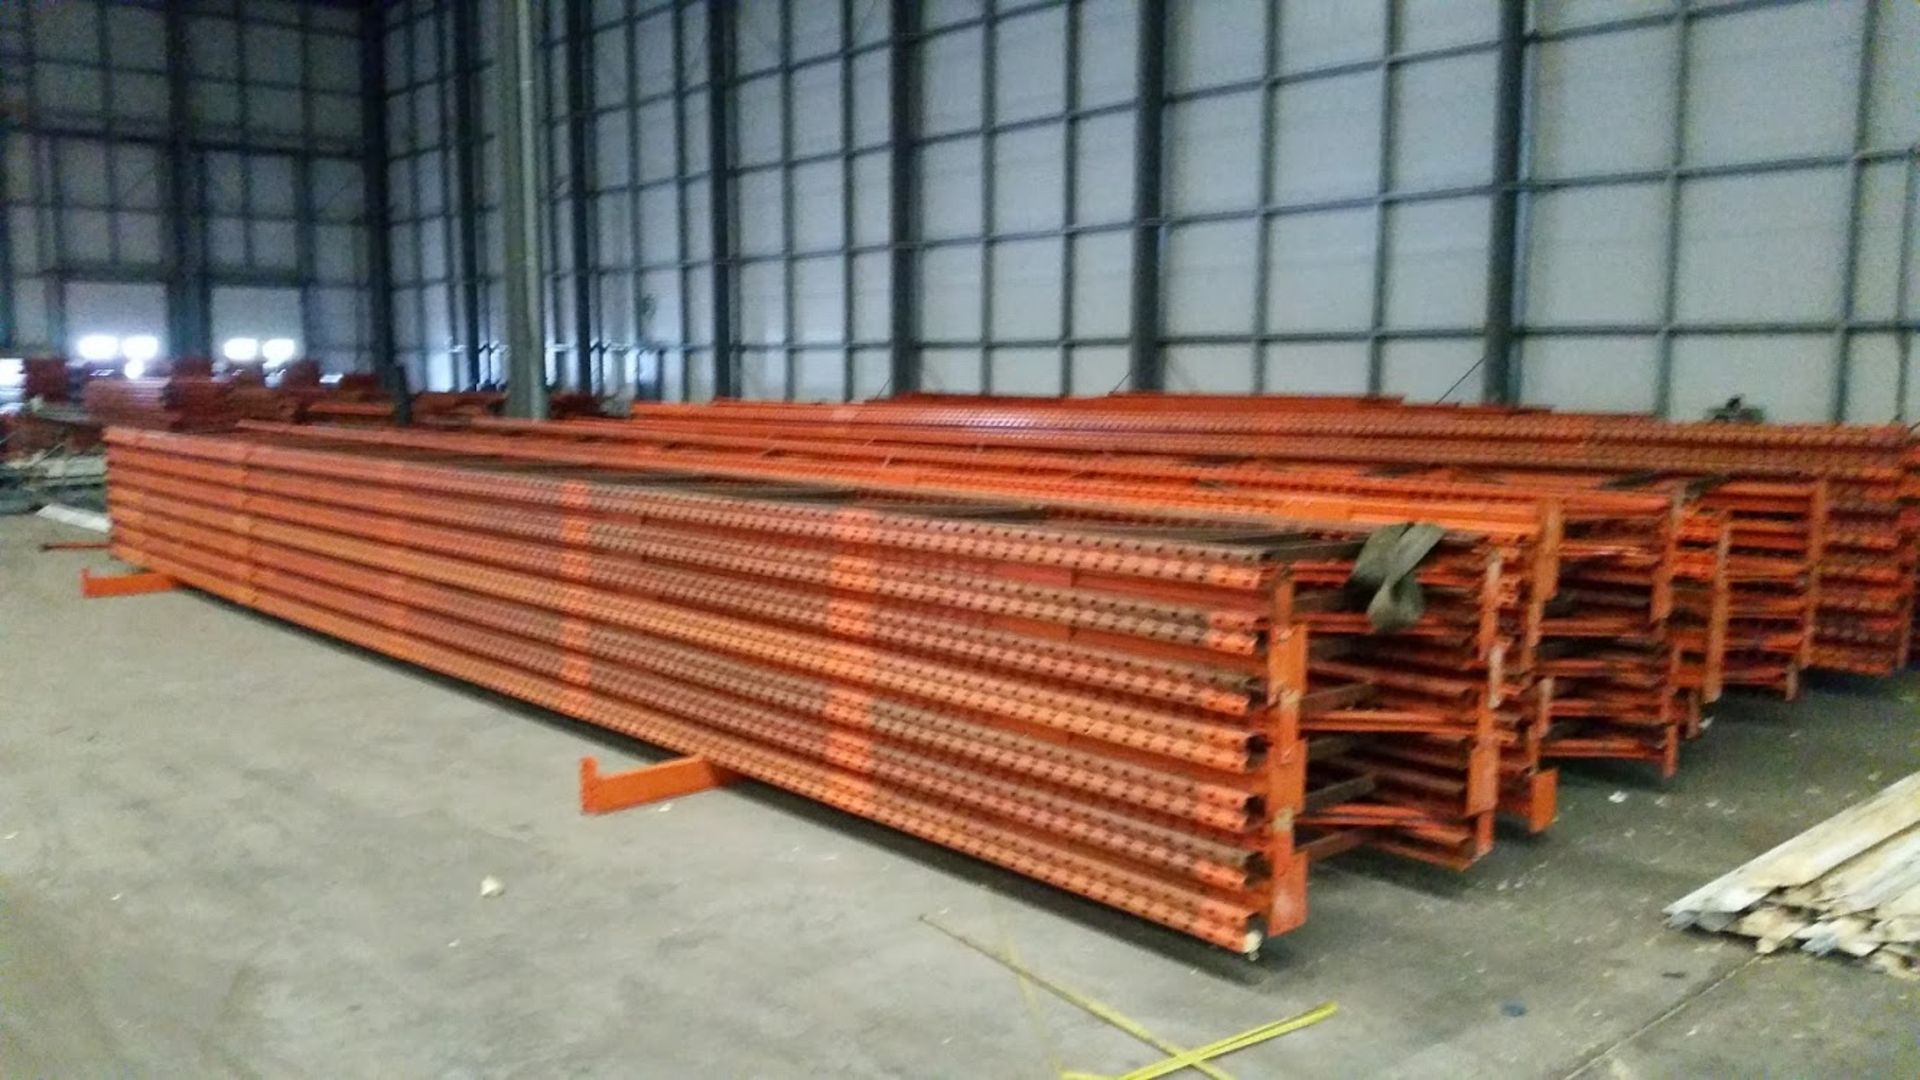 50 Bays of Ready Rack With Scarified Legs - Image 4 of 4